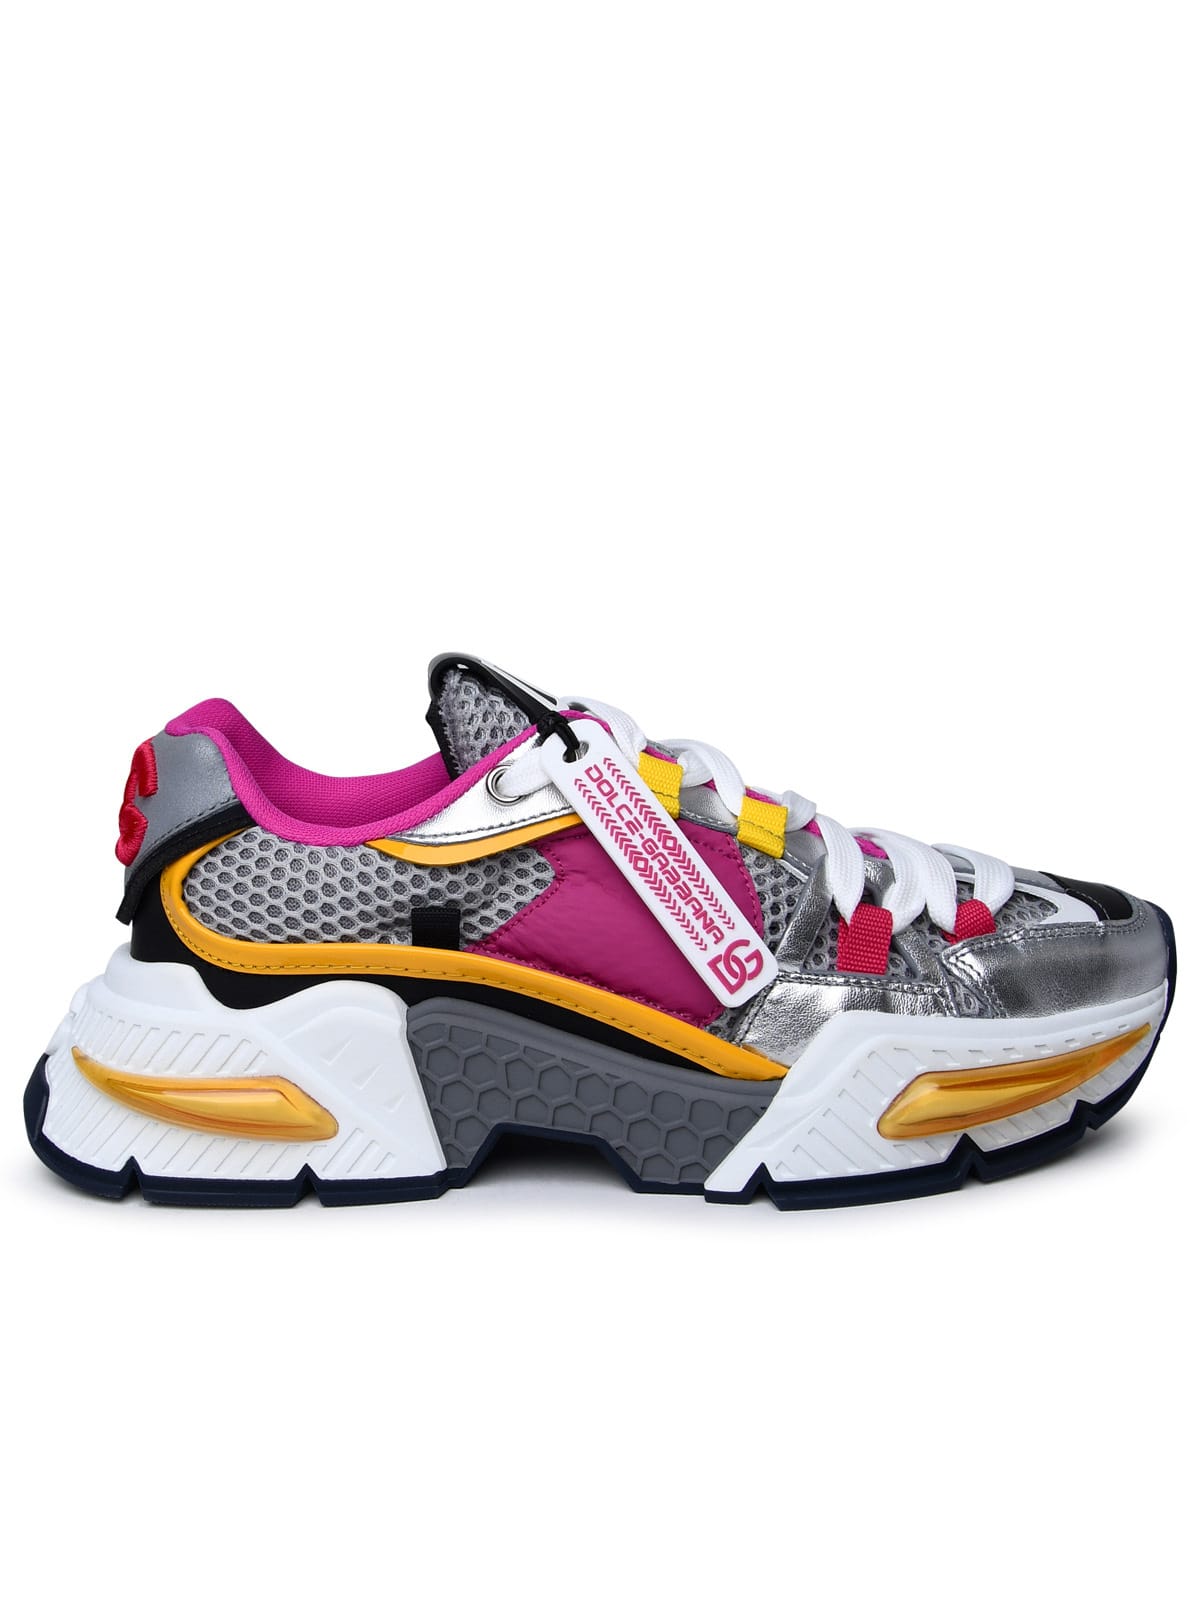 DOLCE & GABBANA MULTIcolour LEATHER BLEND trainers